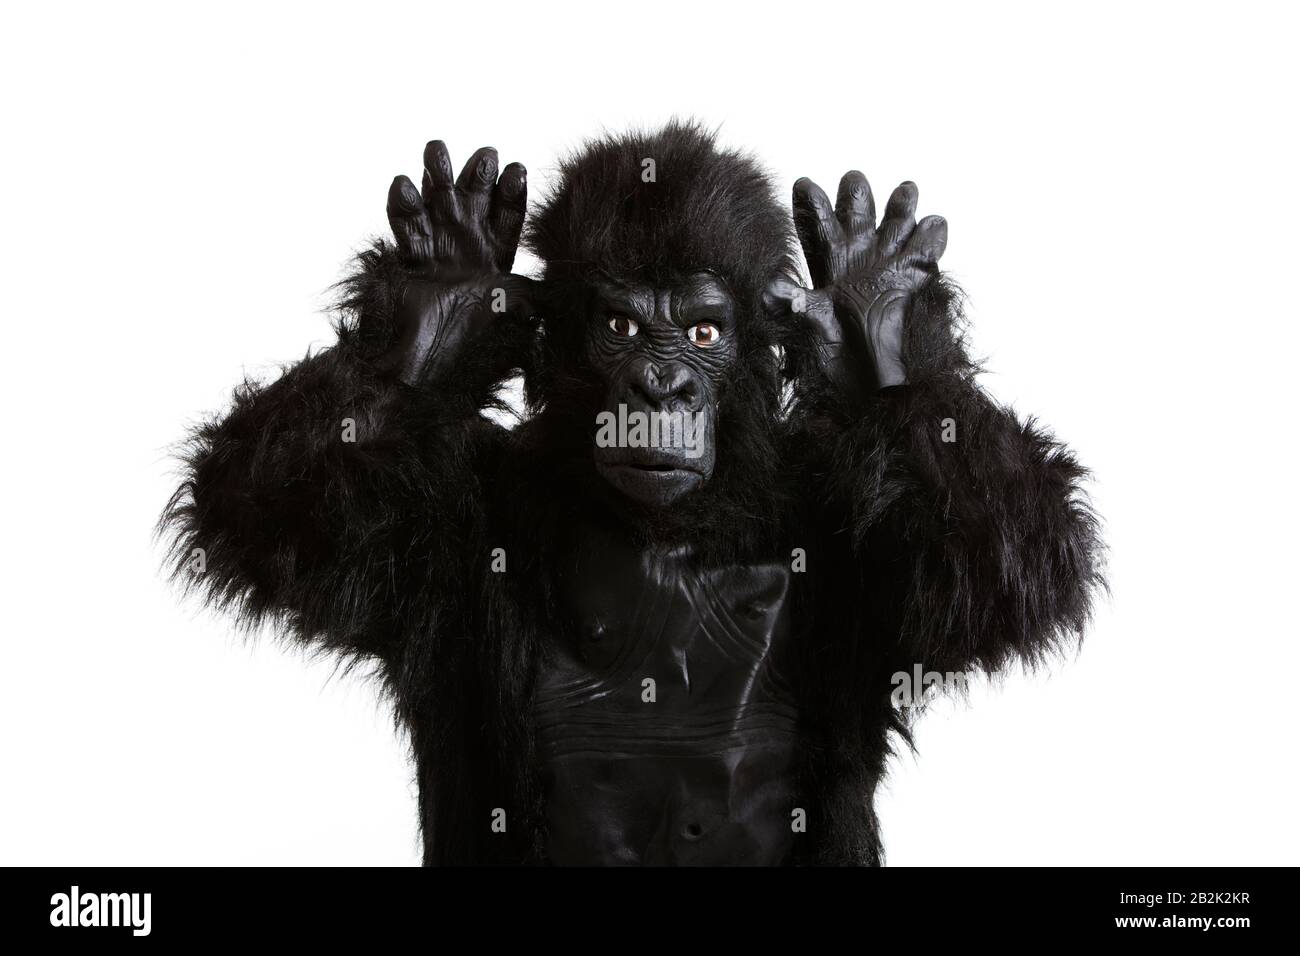 Young man in a gorilla costume making funny face against white background Stock Photo